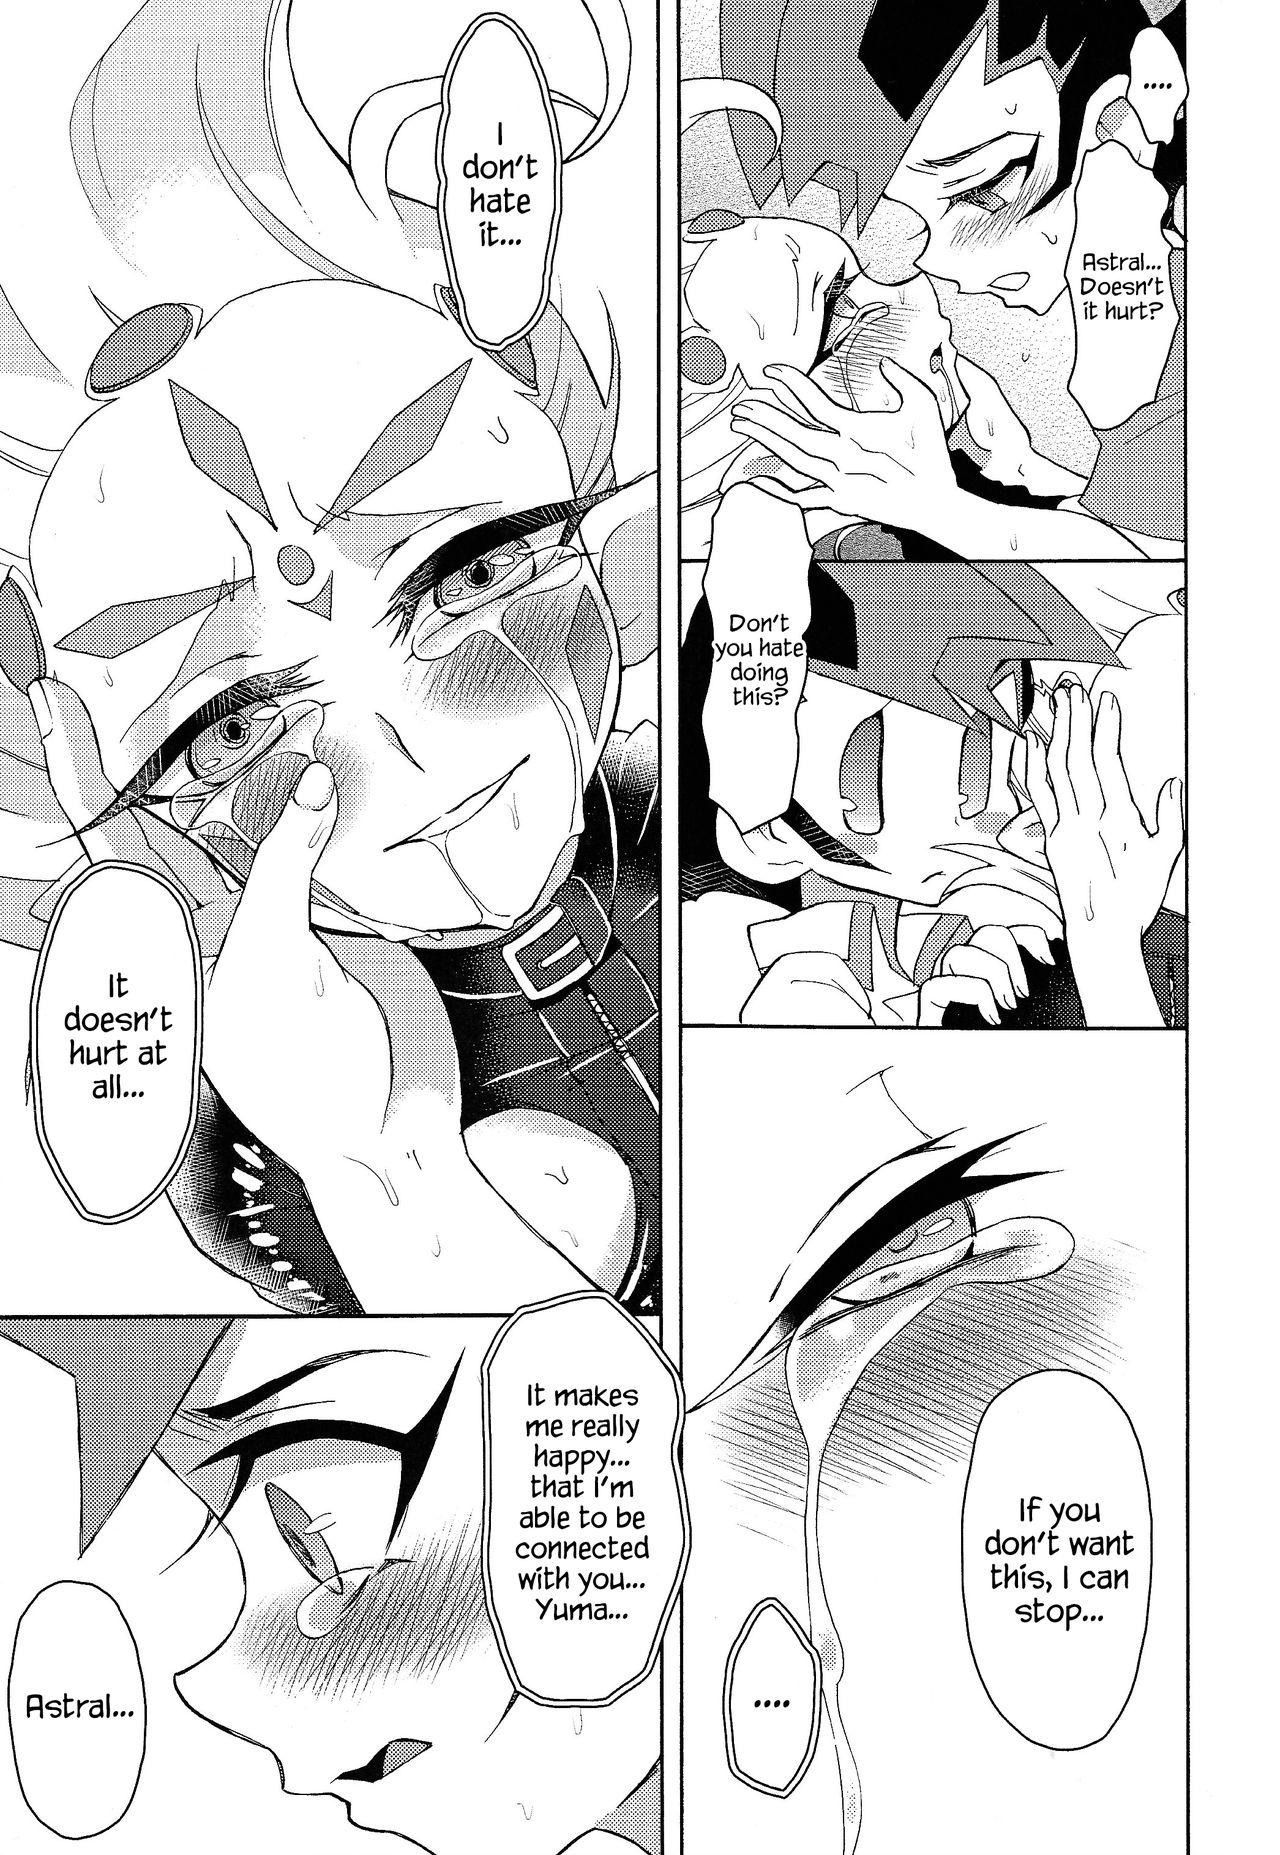 Students LOVERS - Yu-gi-oh zexal Dominate - Page 10